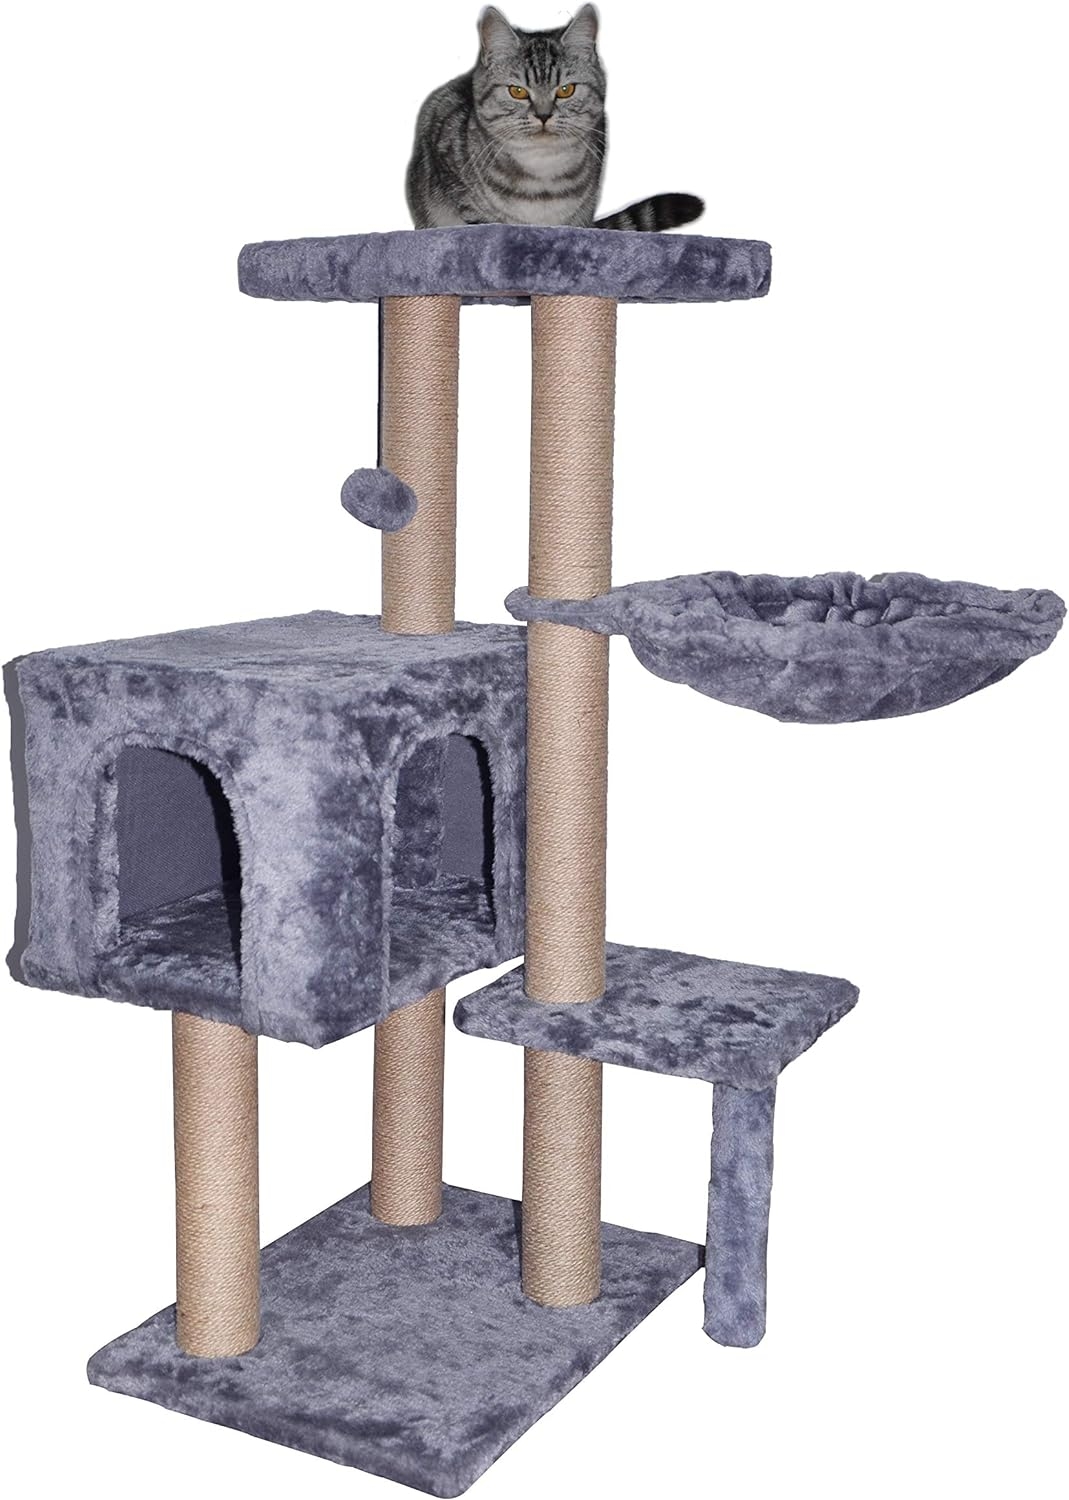 WIKI 002G Cat Tree has Scratching Toy with a Ball Activity Centre Cat Tower Furniture Jute-Covered Scratching Posts Grey